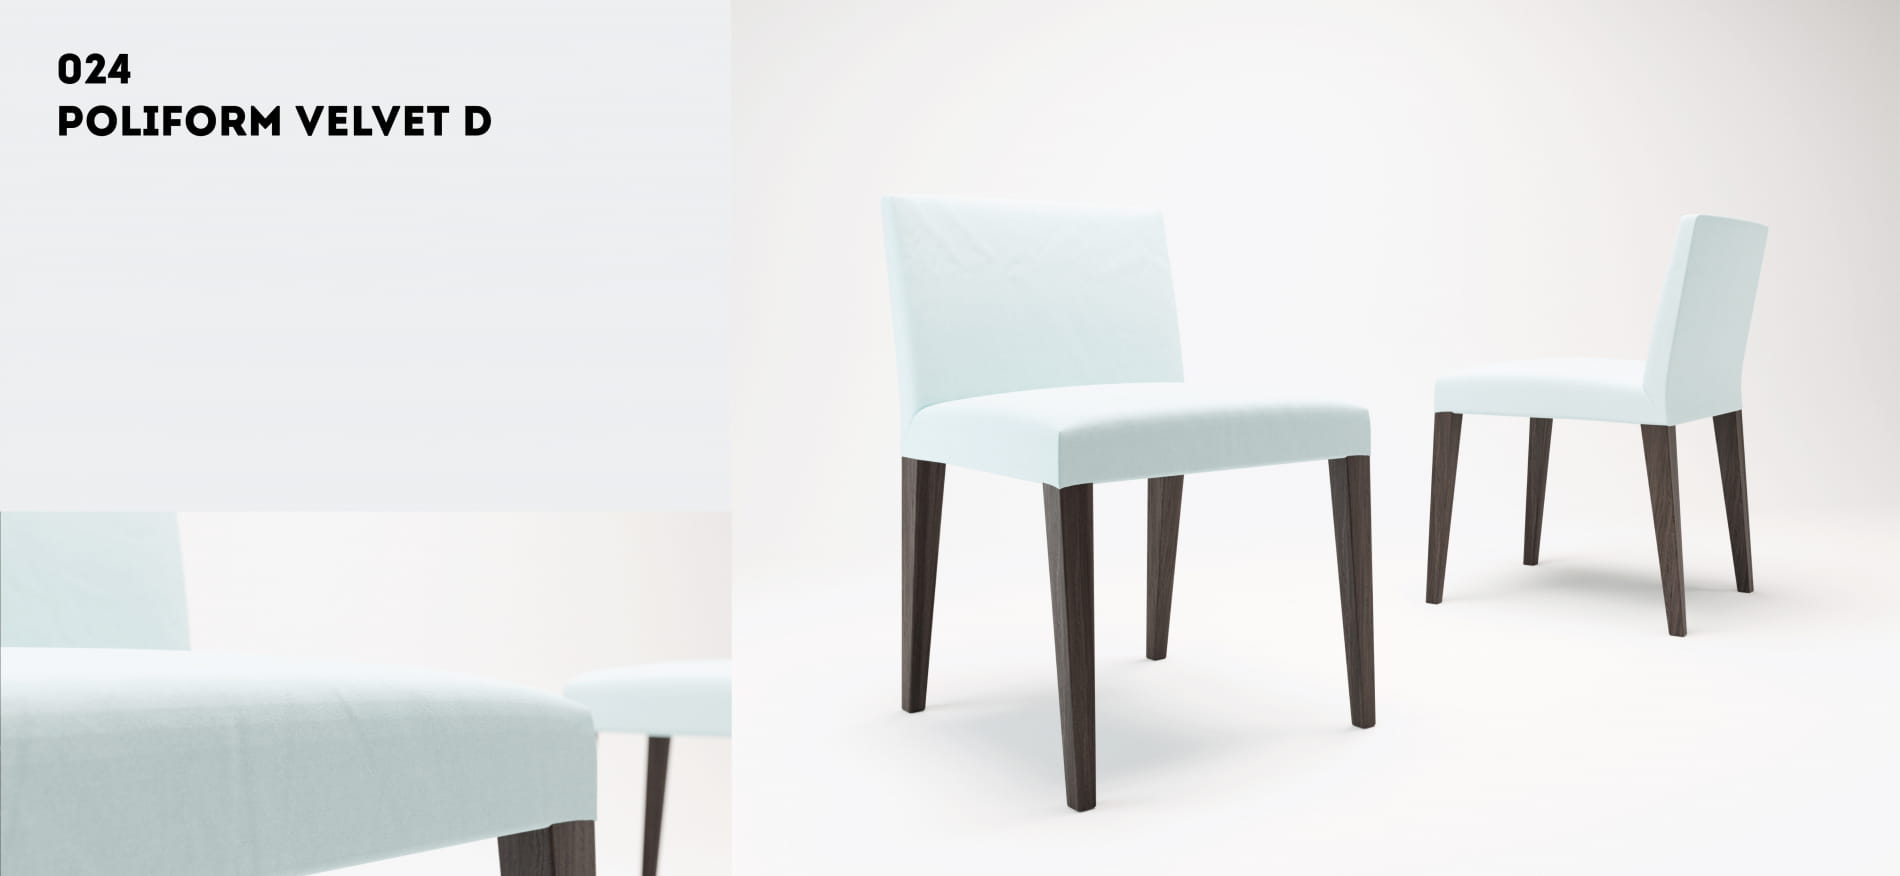 poliform-chairs-collection